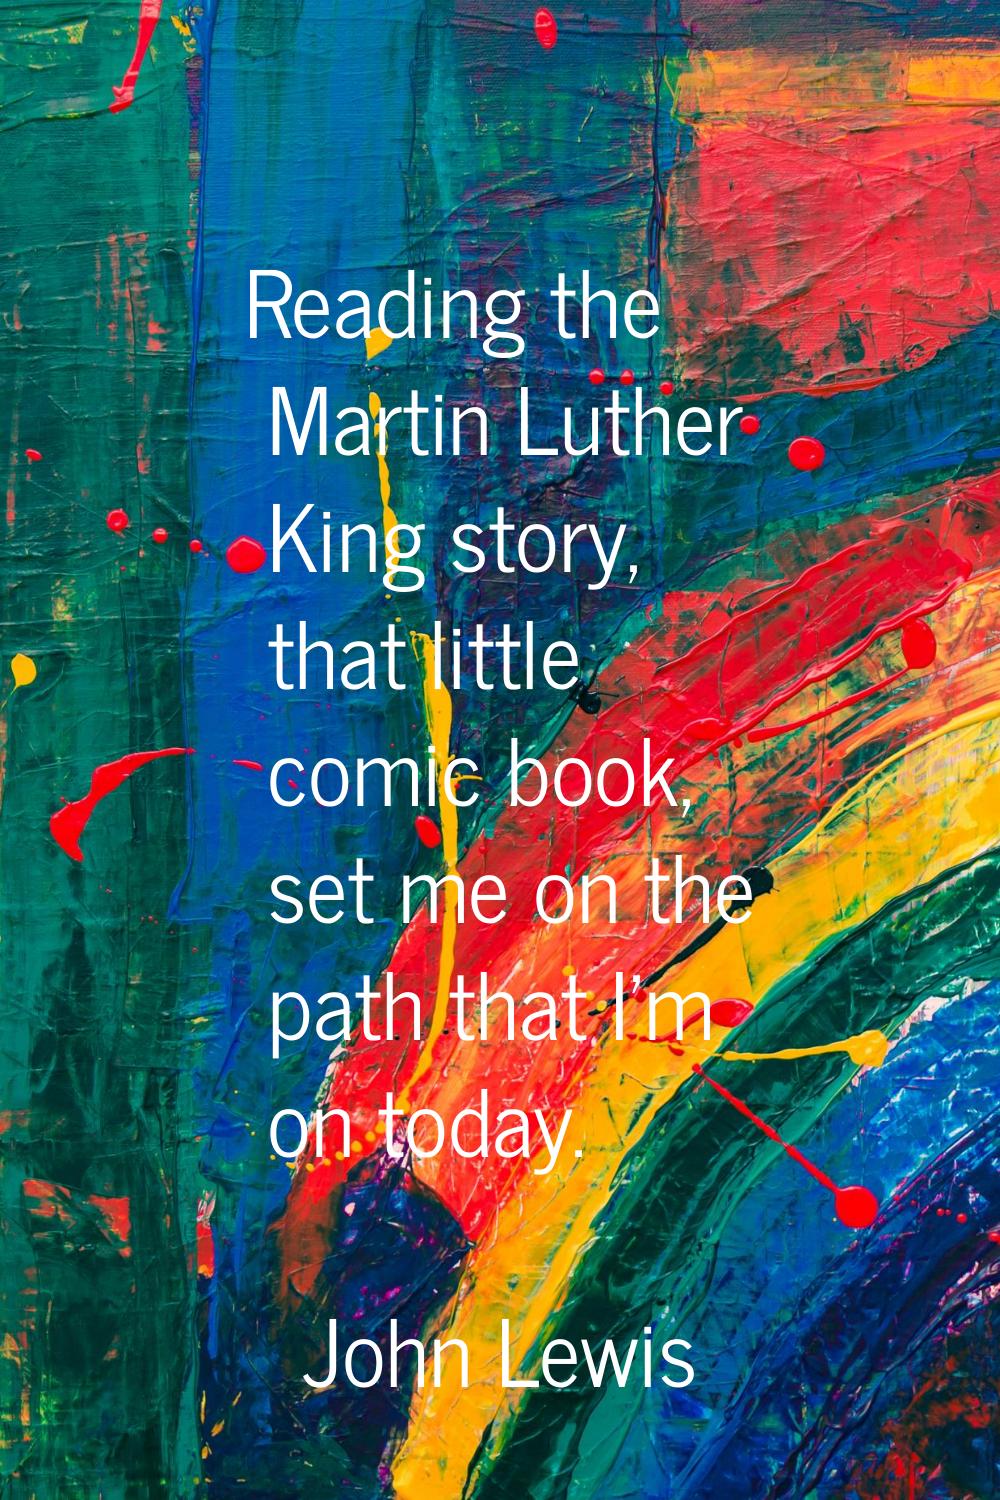 Reading the Martin Luther King story, that little comic book, set me on the path that I'm on today.